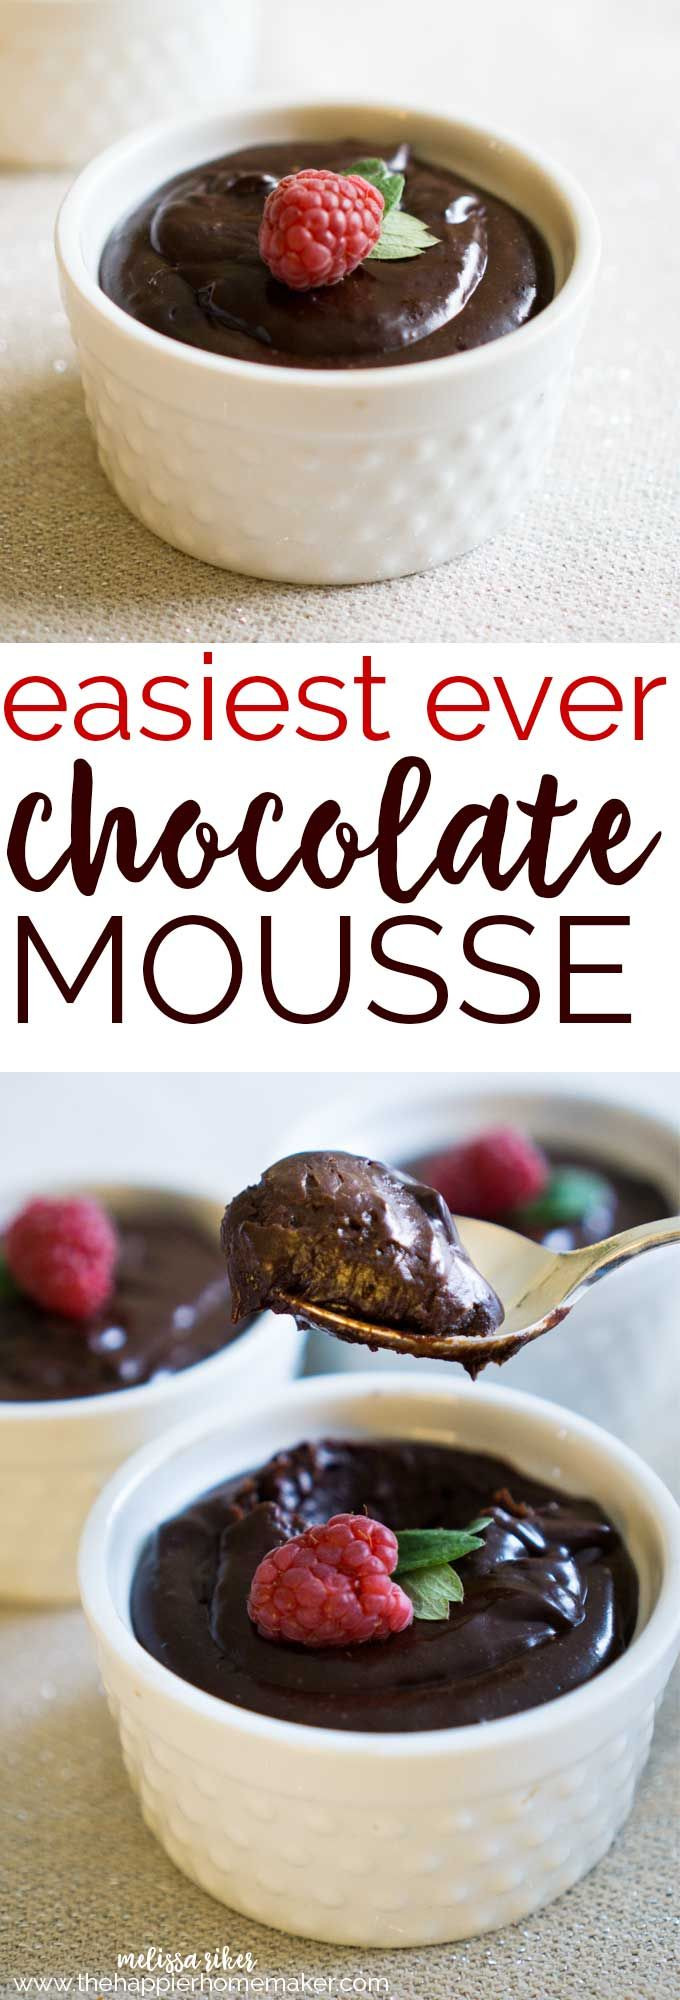 Chocolate Mousse With No Eggs
 Easy Chocolate Mousse No Eggs Recipe